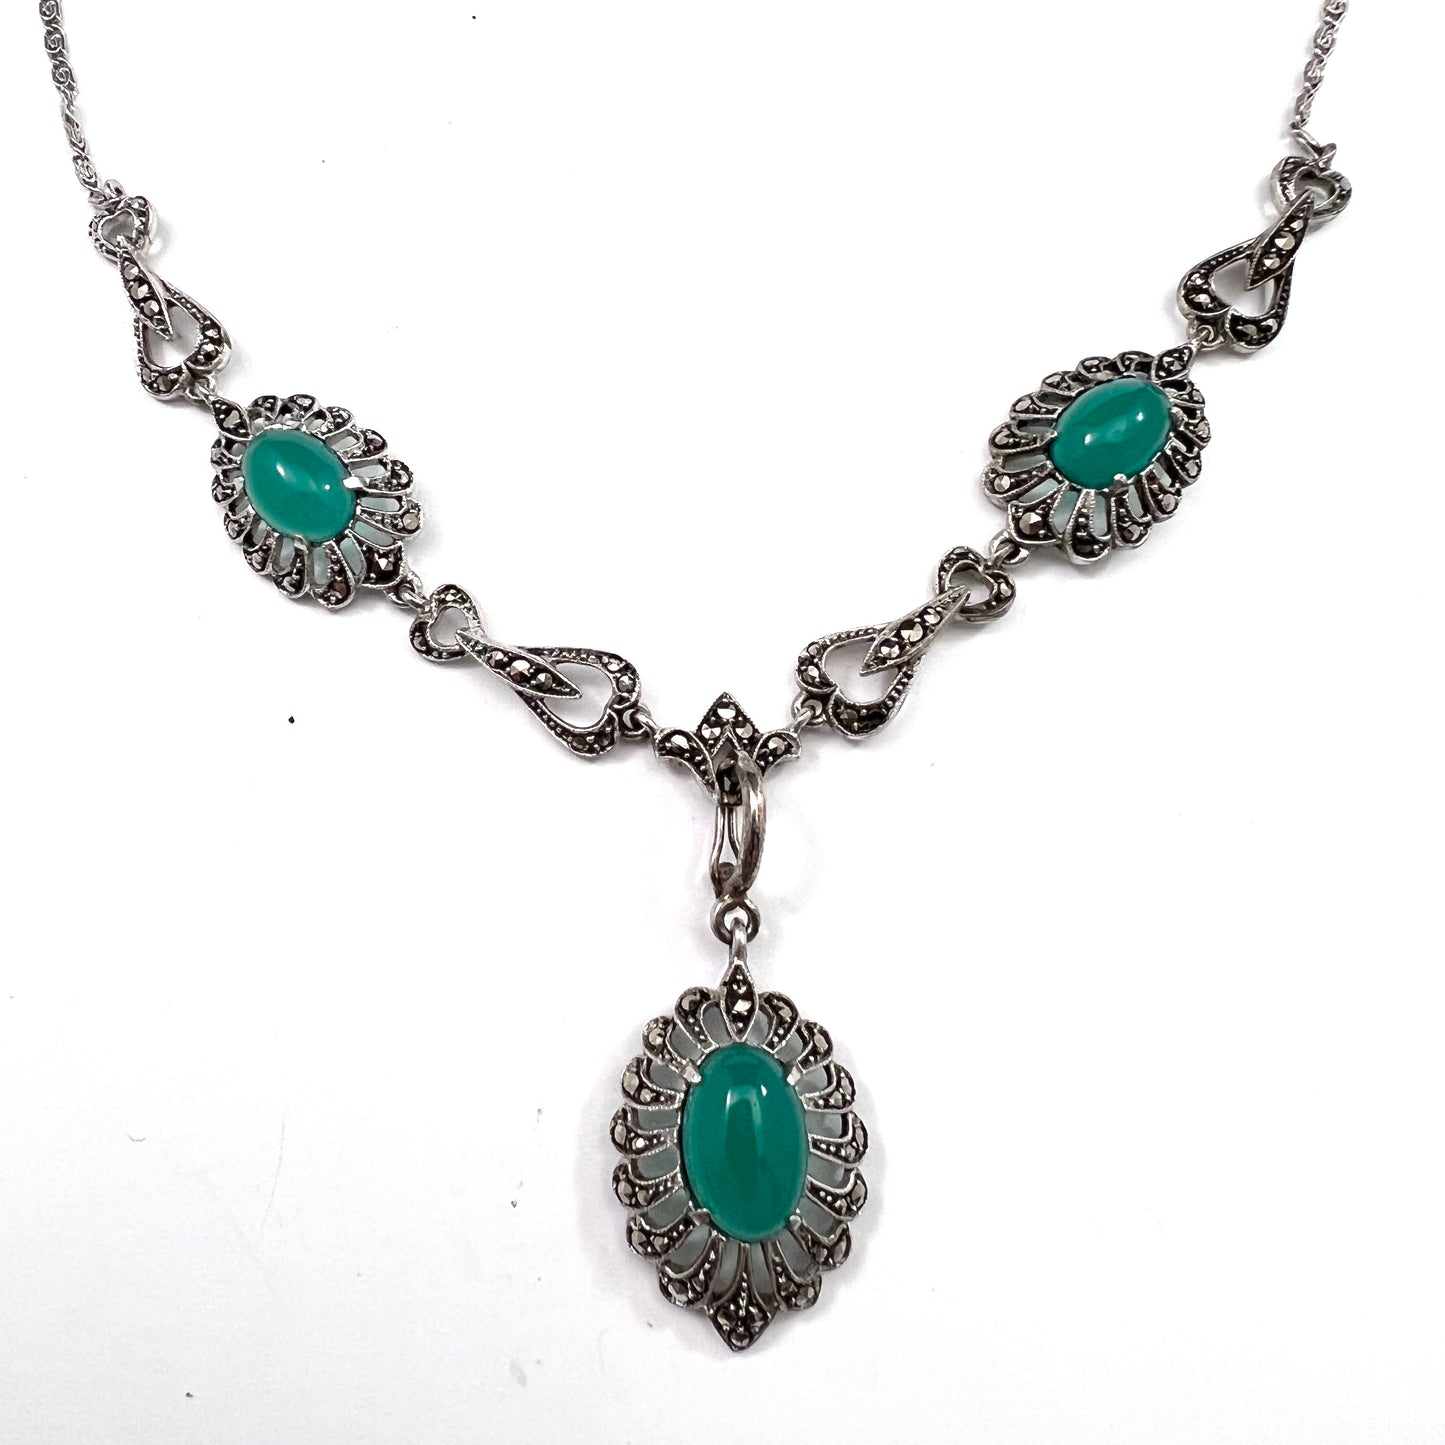 Sweden 1930-40s. Solid Silver Chrysoprase Marcasite Necklace.